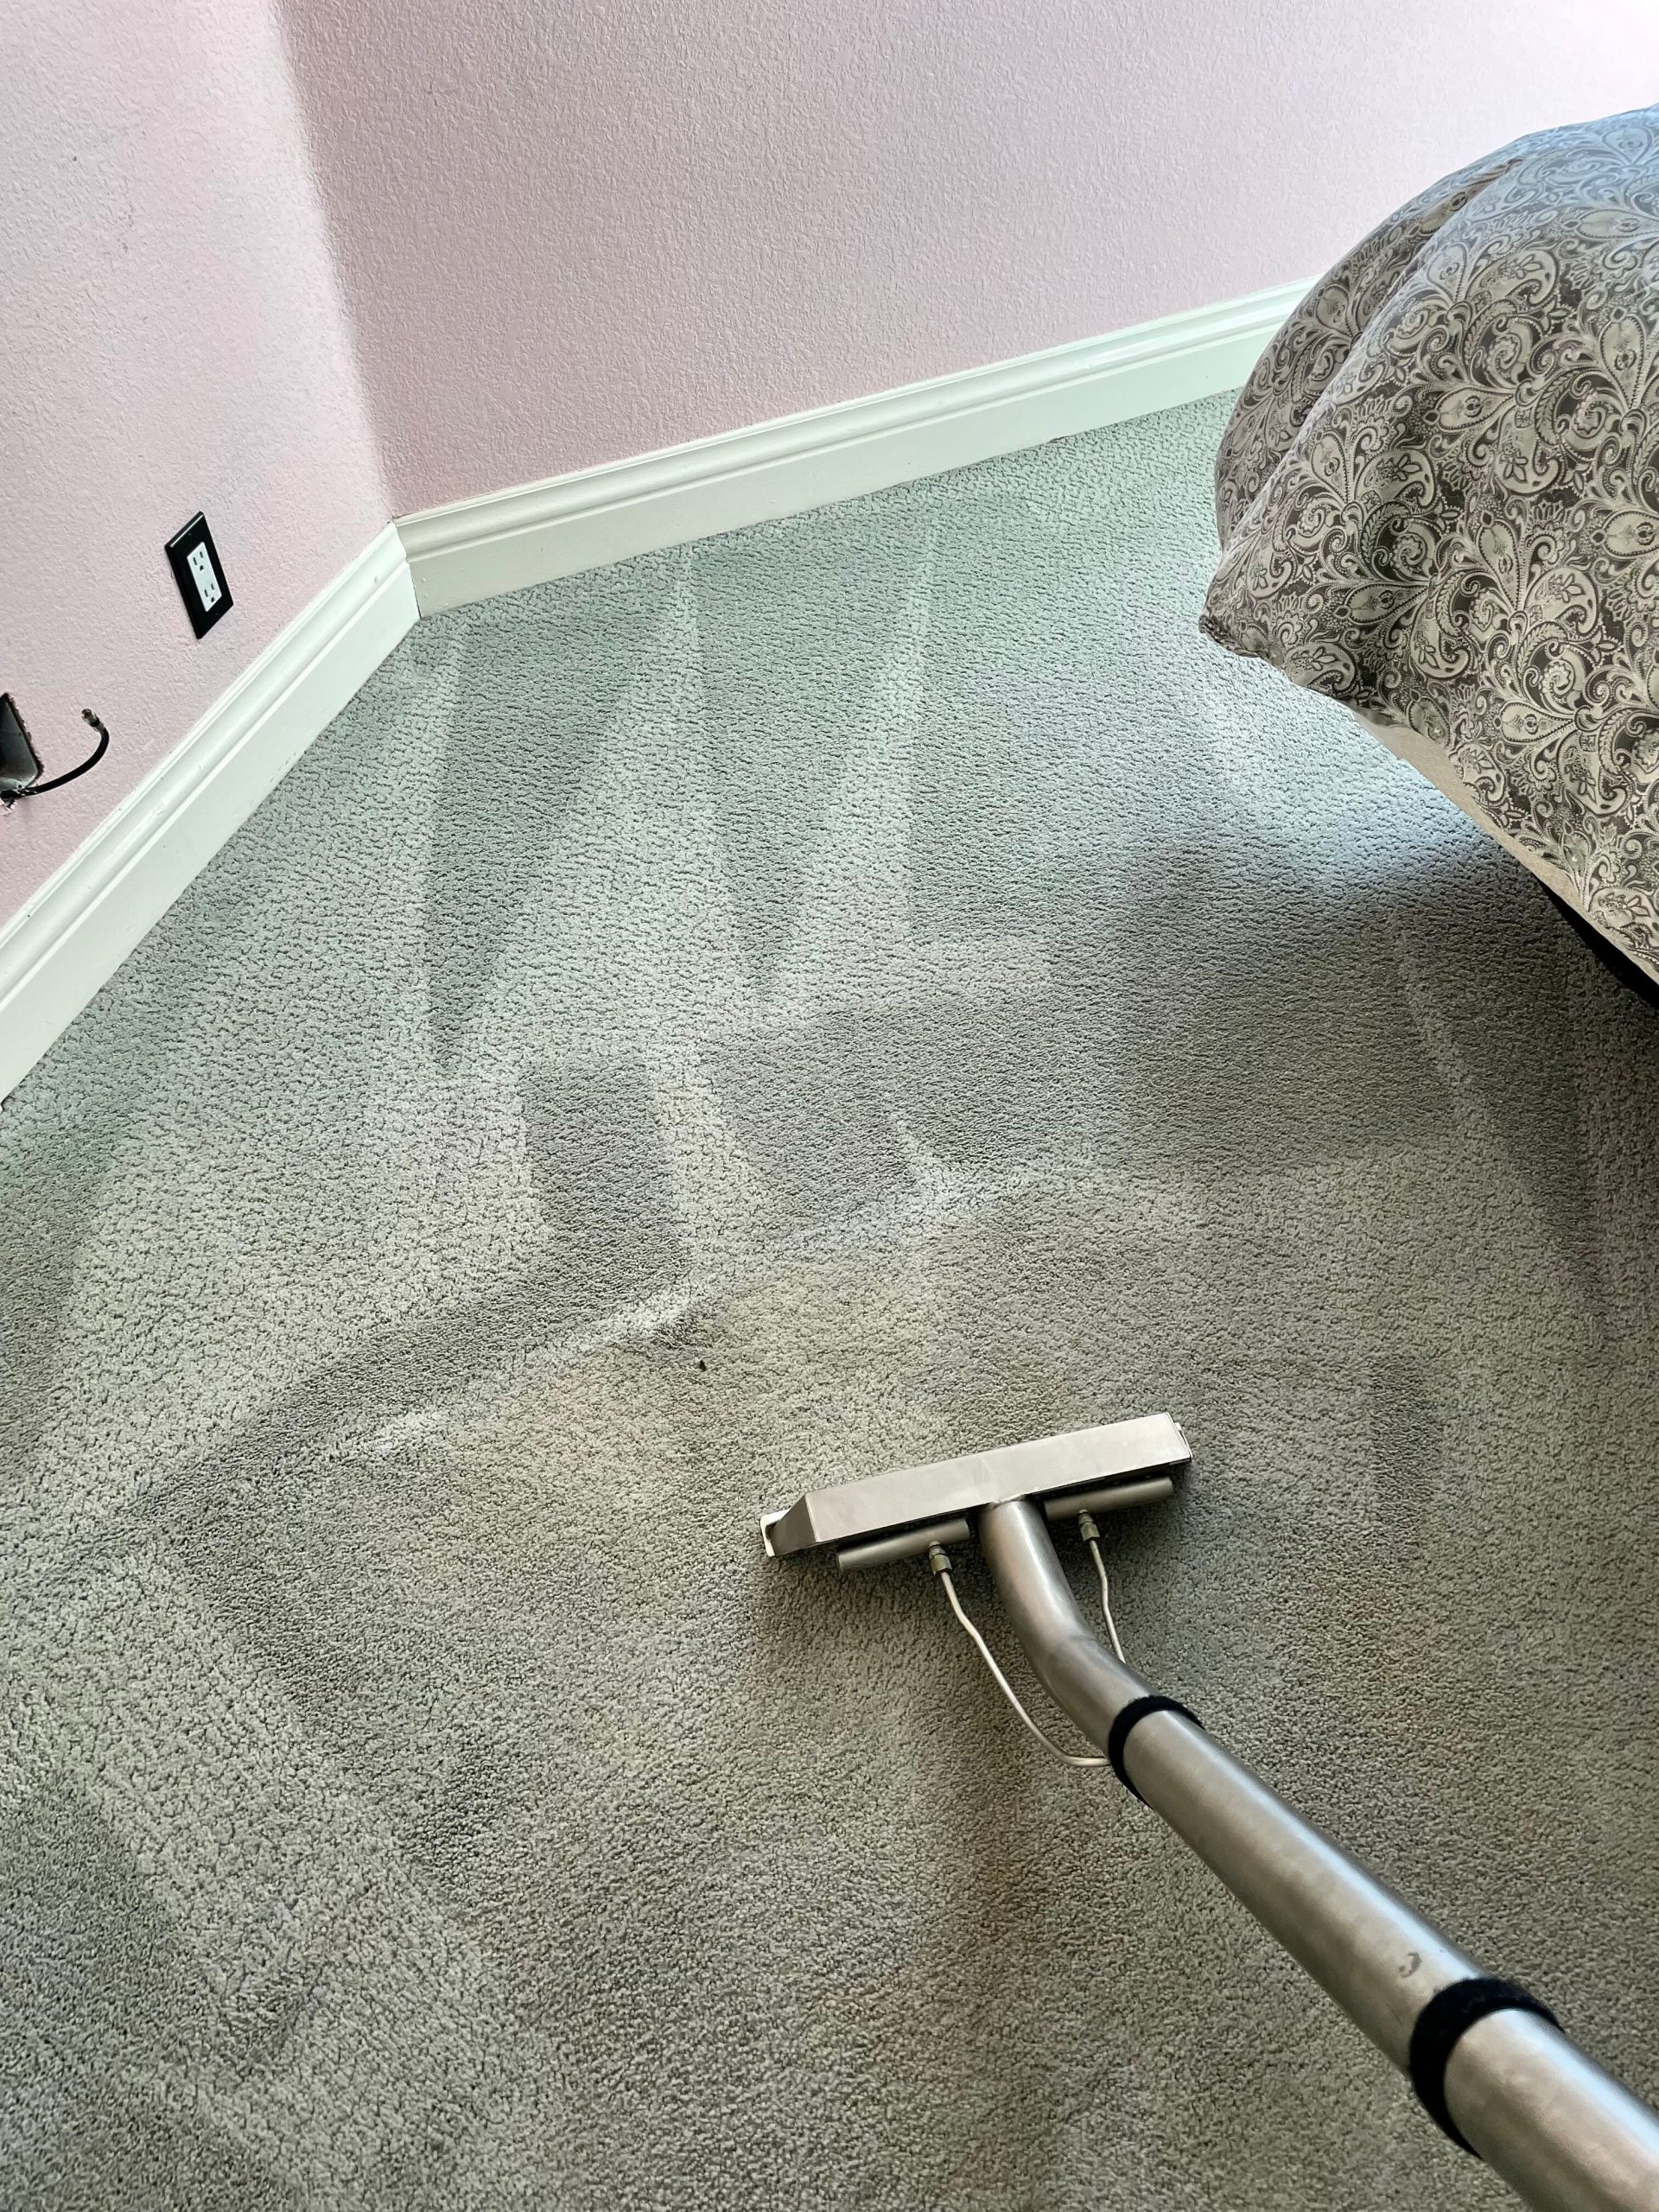 Professional steam carpet cleaning equipment and solutions used by A & G Facility Services